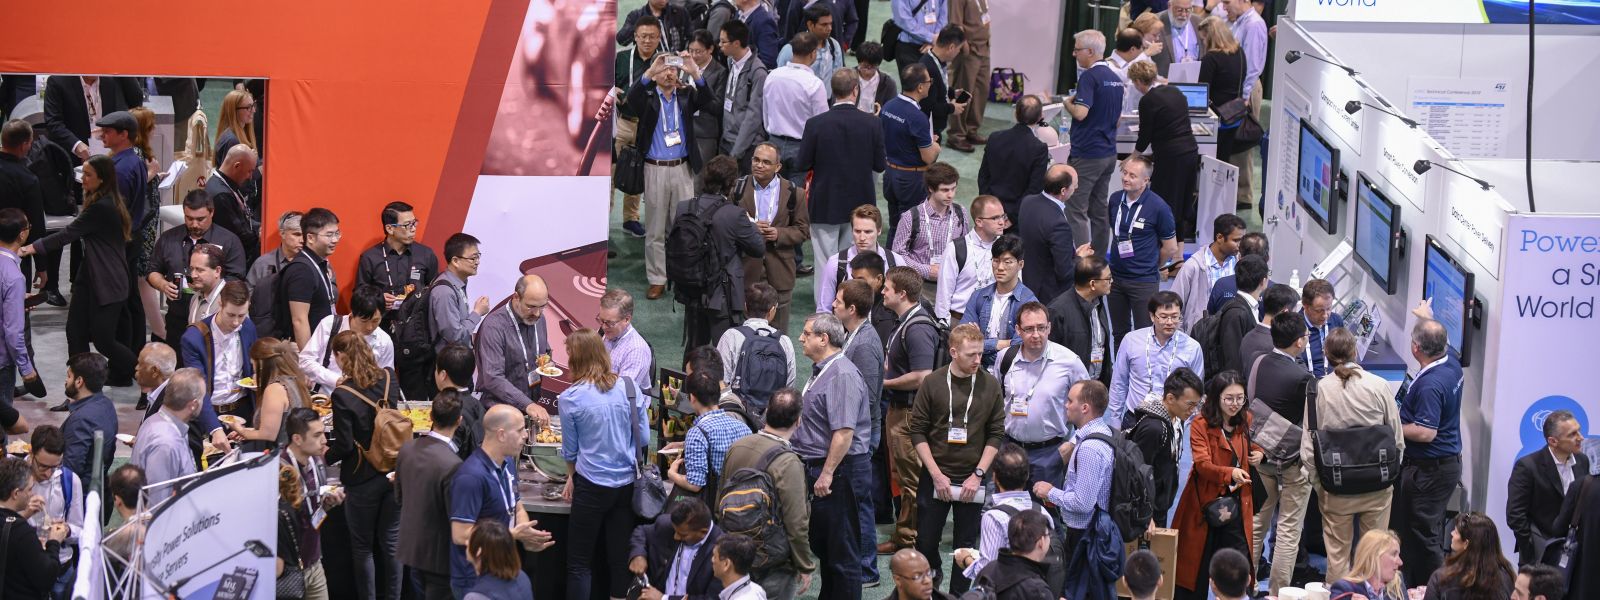 Attendees and exhibitors gather at APEC 2019 in Anaheim, California. Image used courtesy of APEC